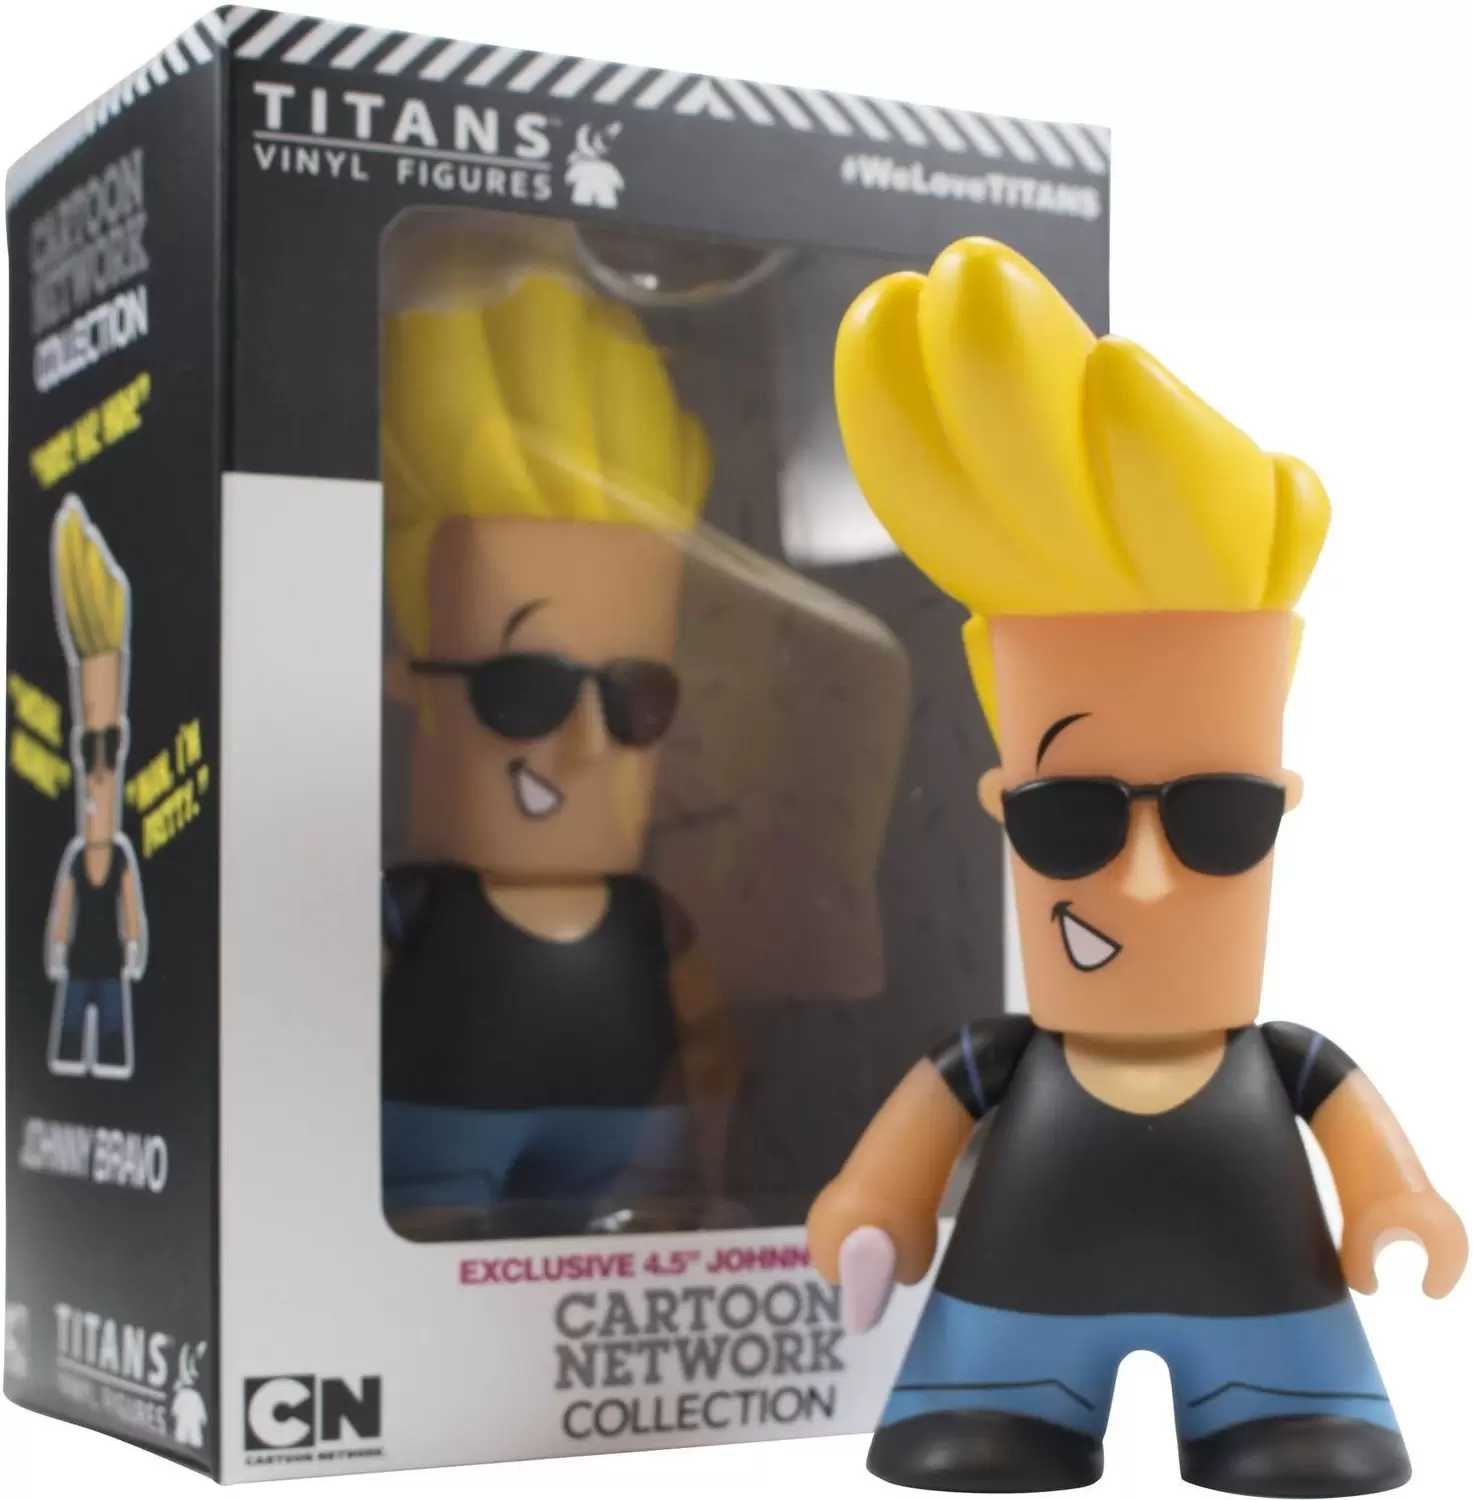 TITANS Big Sizes, Pack and Exclusives - Cartoon Network TITANS - 4.5\